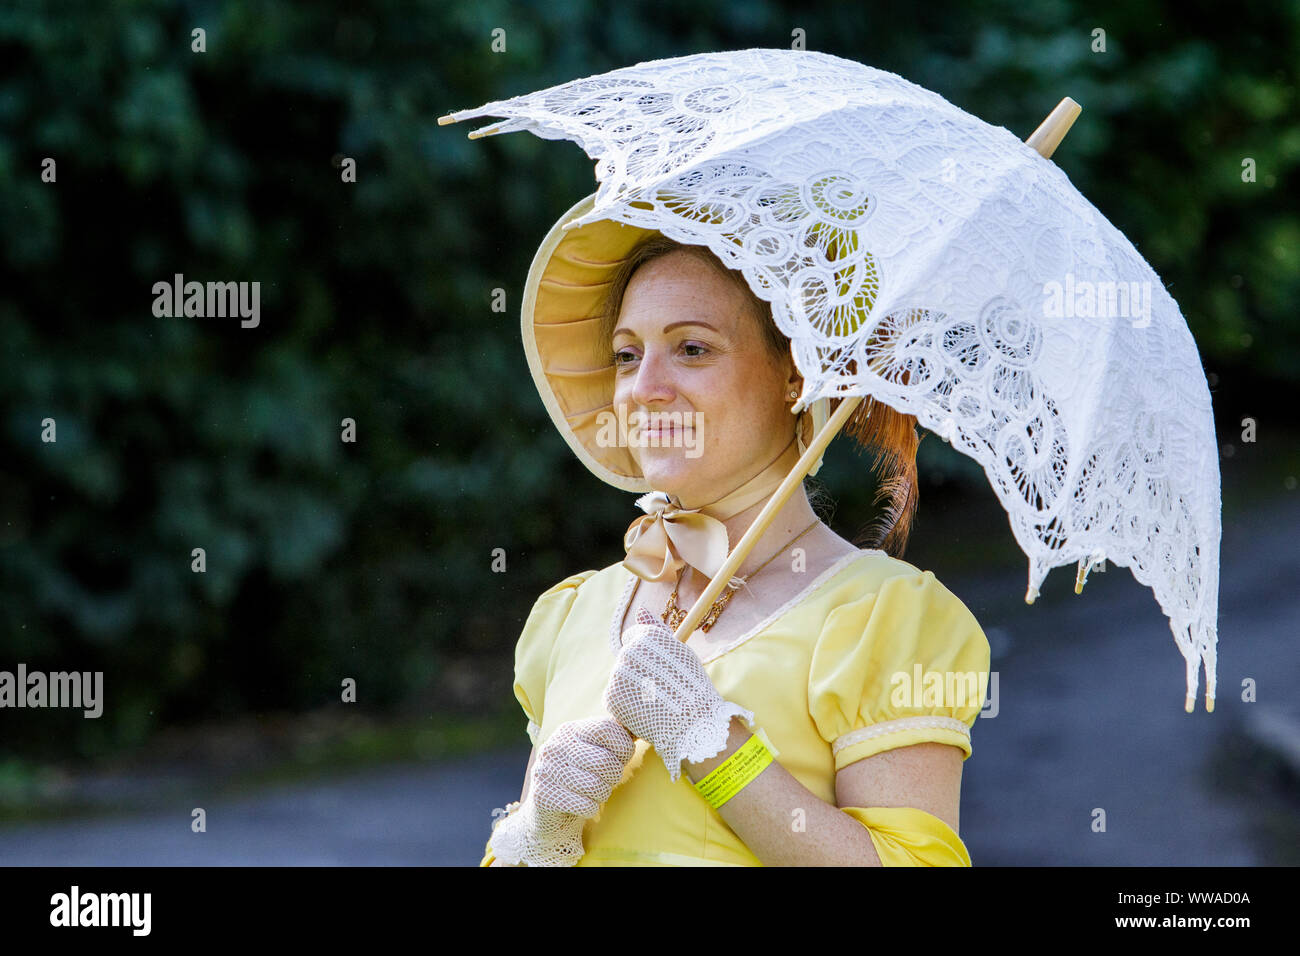 Bath, Somerset, UK. 14th Sep, 2019. A Jane Austen fan taking part in the world famous Grand Regency Costumed Promenade is pictured in Bath's Parade Gardens. The Promenade, part of the 10 day Jane Austen Festival is a procession through the streets of Bath and the participants who come from all over the world dress in 18th Century costume. Credit: lynchpics/Alamy Live News Stock Photo